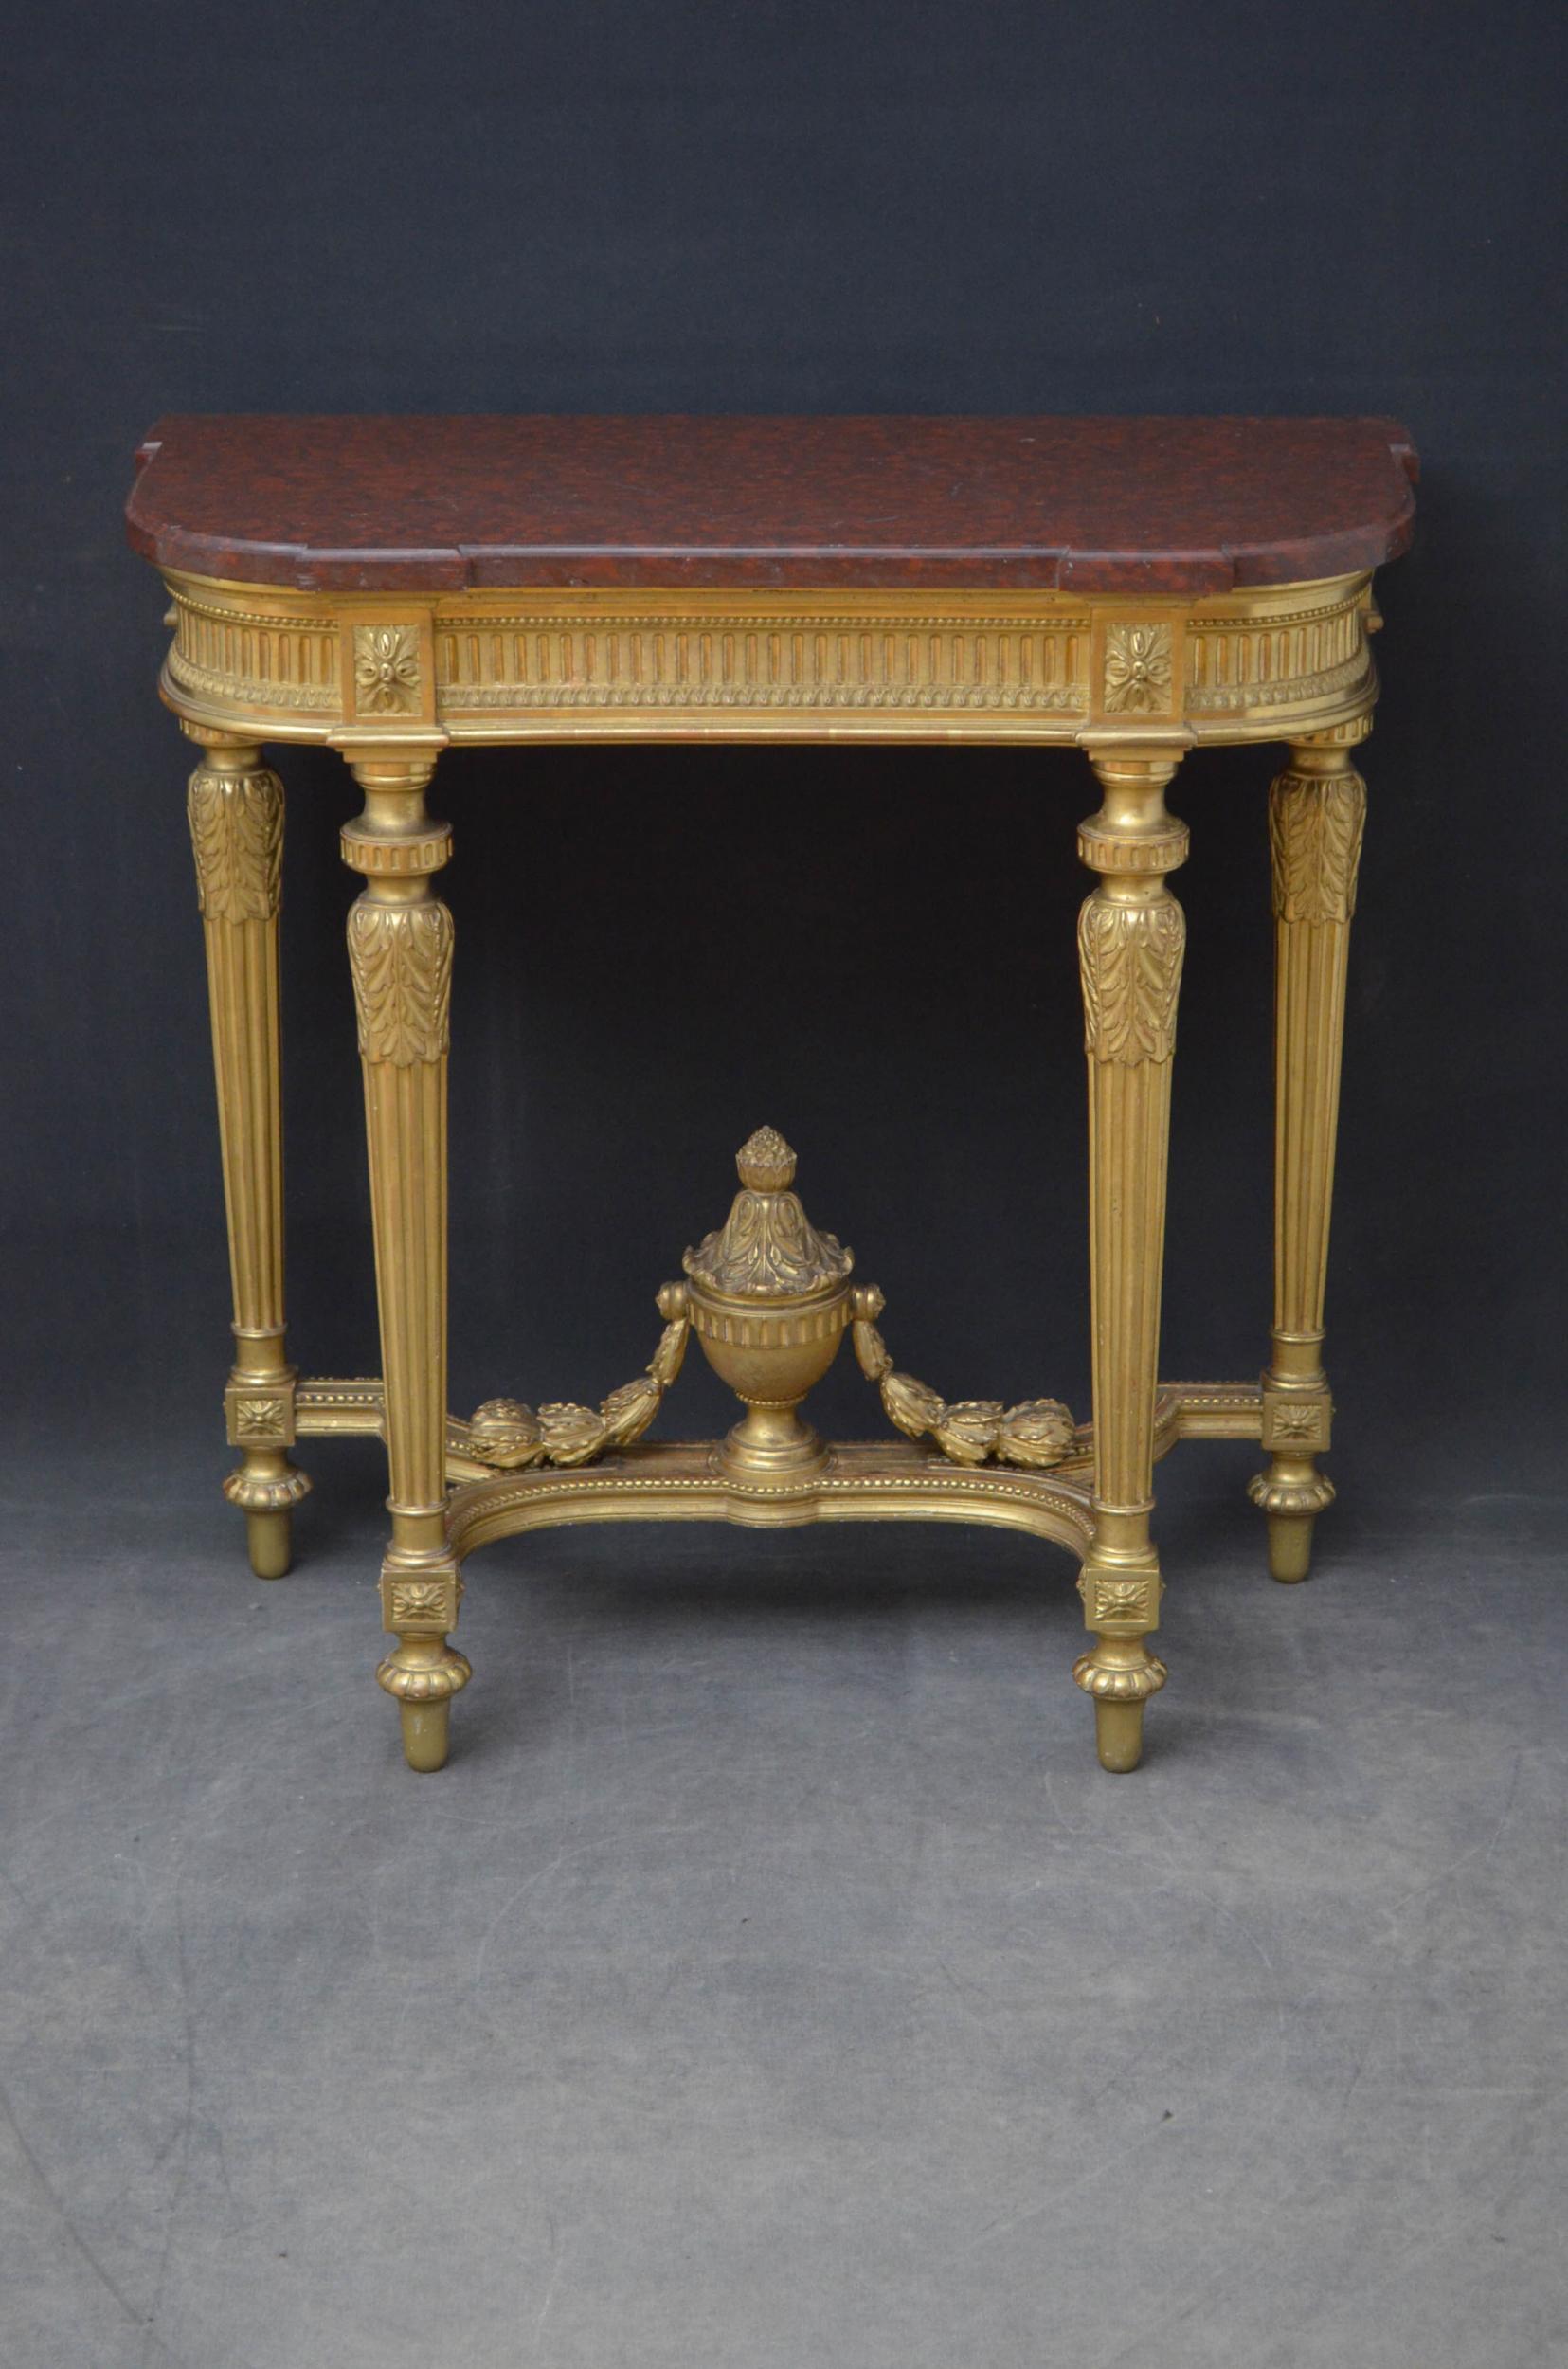 Sn4930 Elegant Victorian gilded console table in Regency taste, having original veined marble top enclosing original jardinière liner above moulded, beaded, reeded and carved frieze decorated with floral paterae, standing on slender turned, reeded